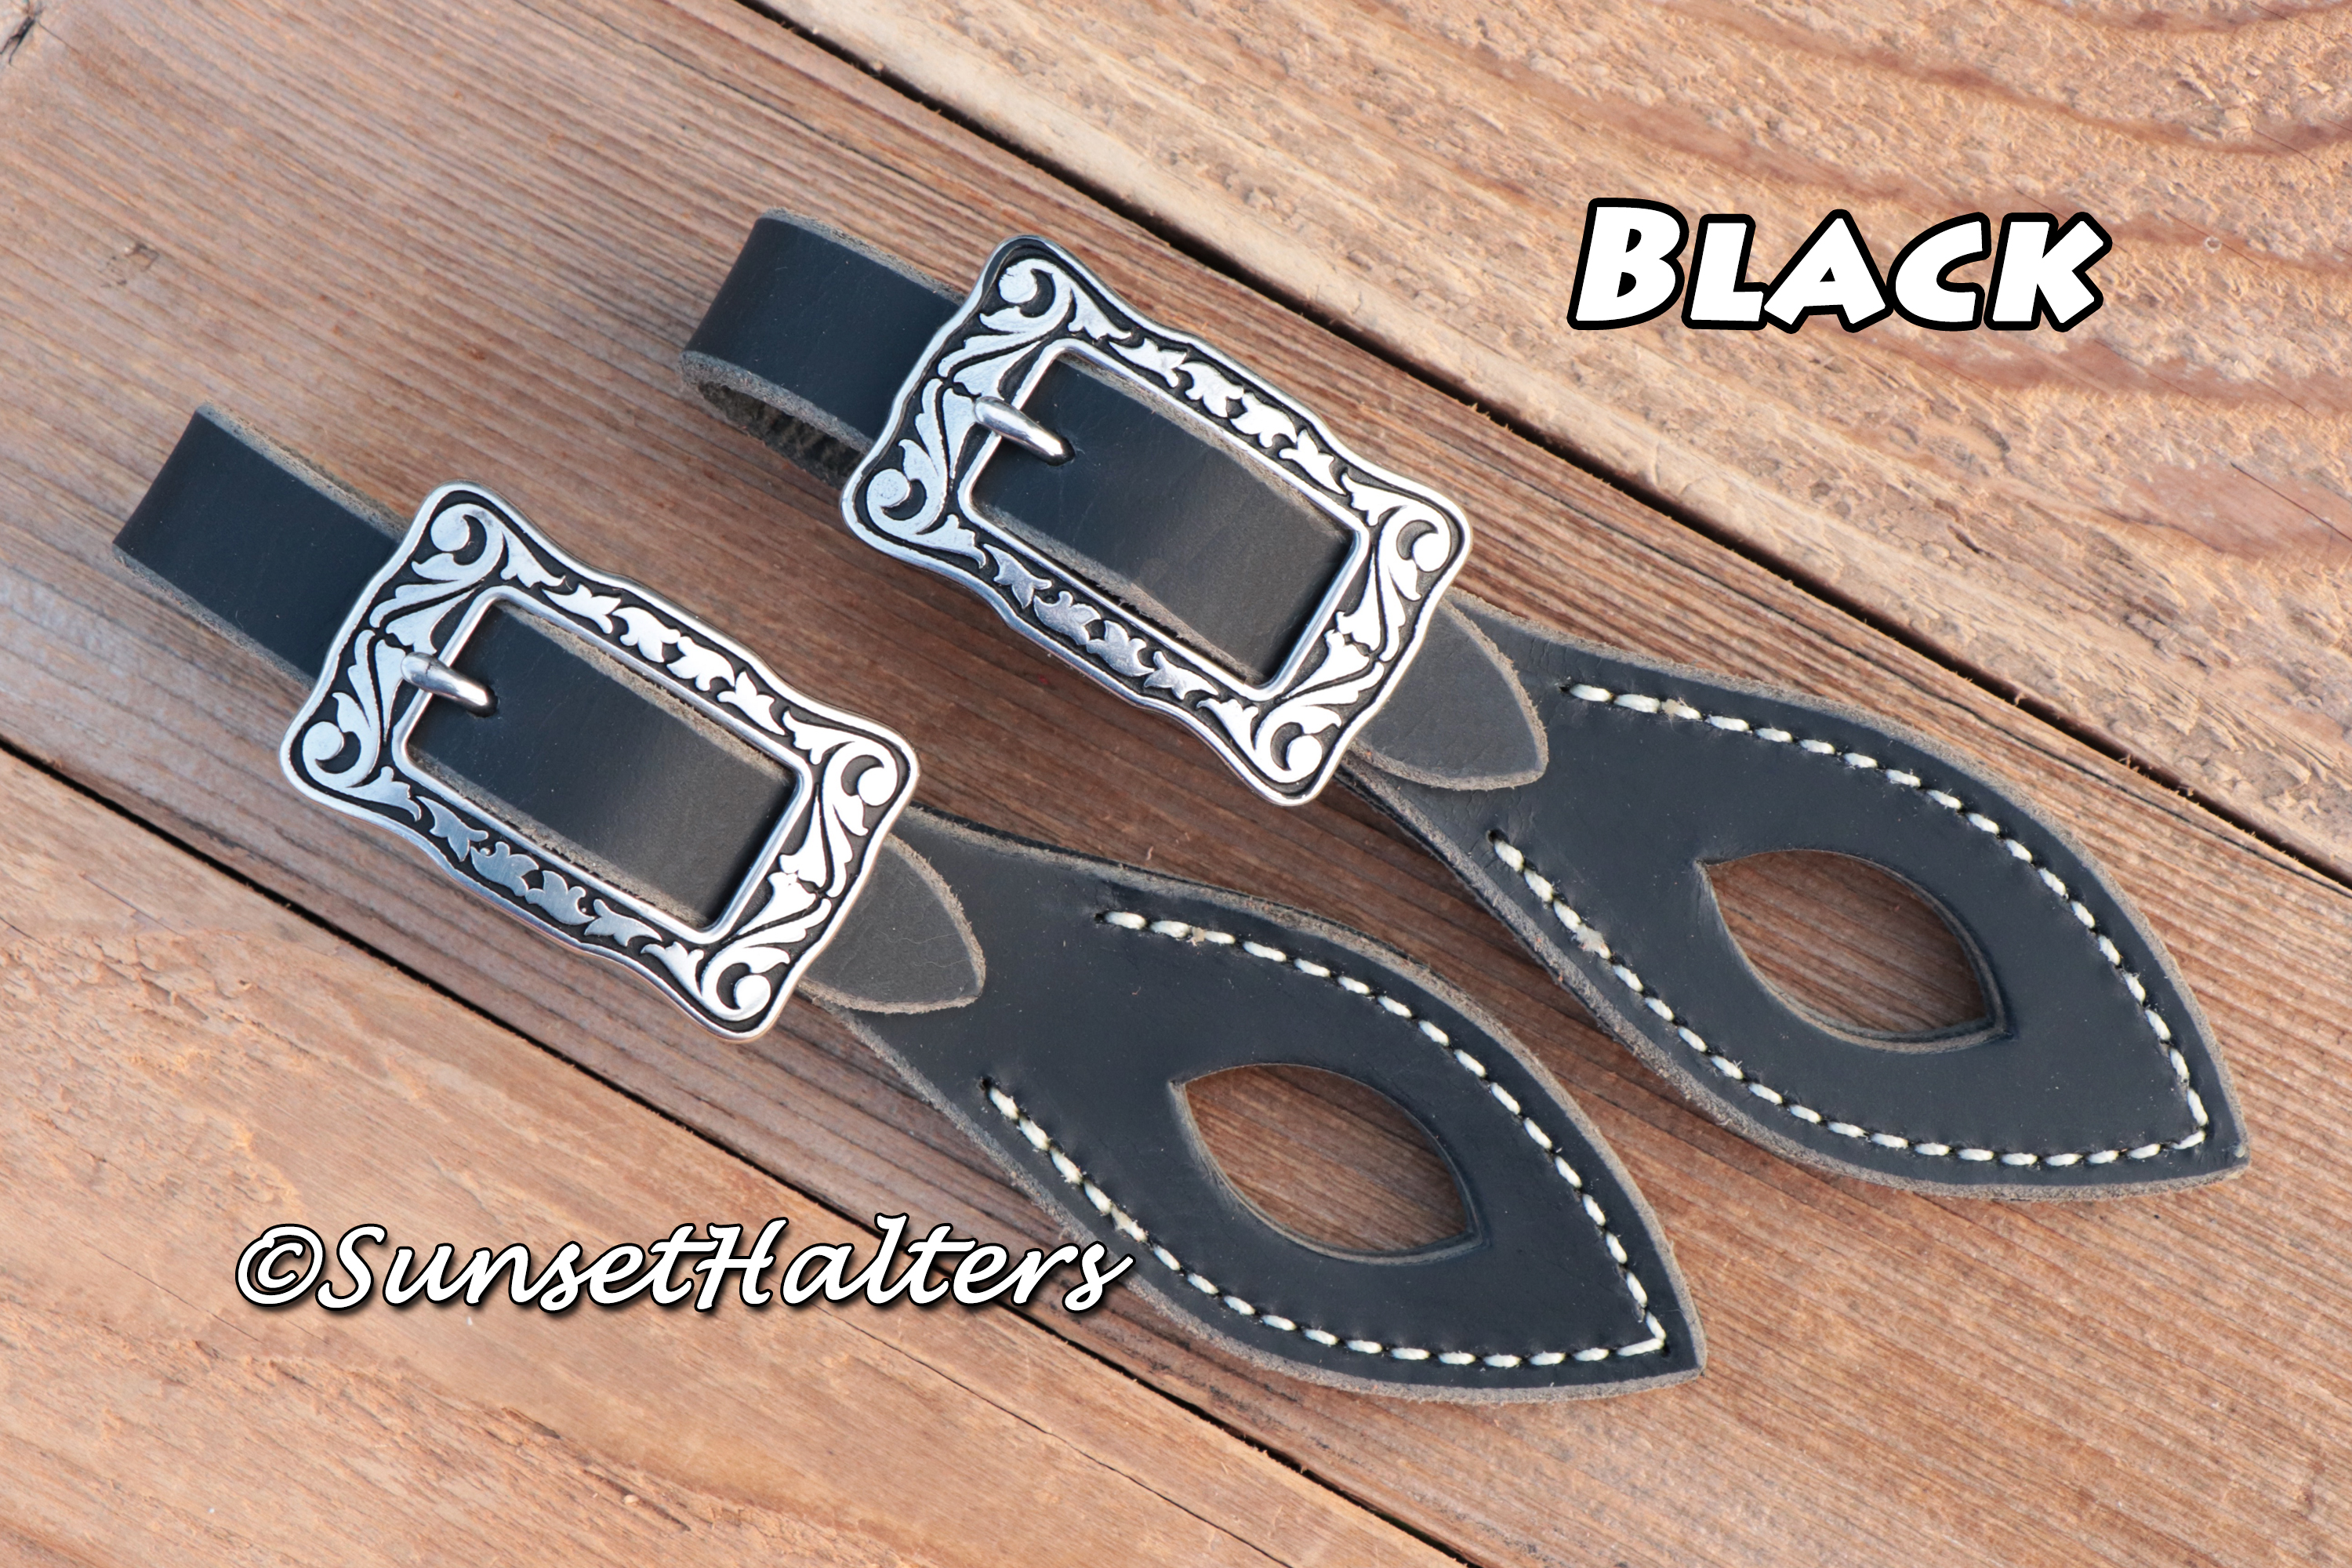 Buckle Snap Slobber Straps W Jeremiah Watt Stainless Steel Floral Engraved  Buckles Loops for Mecate Reins Black or Silver Finish -  Finland